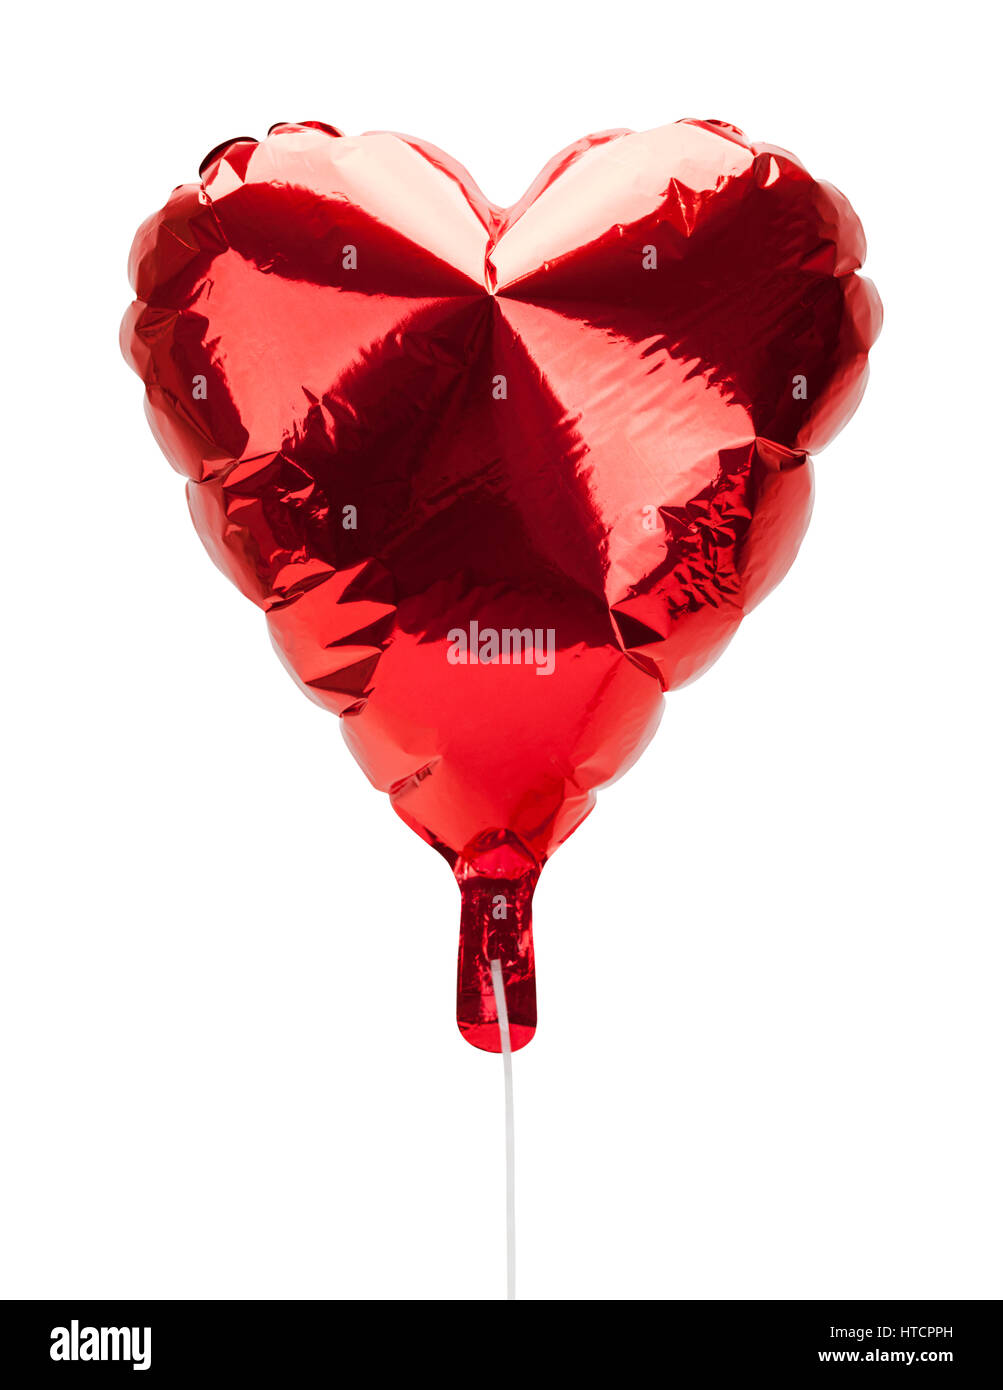 Red Heart Valentines Balloon Isolated on White Background. Stock Photo